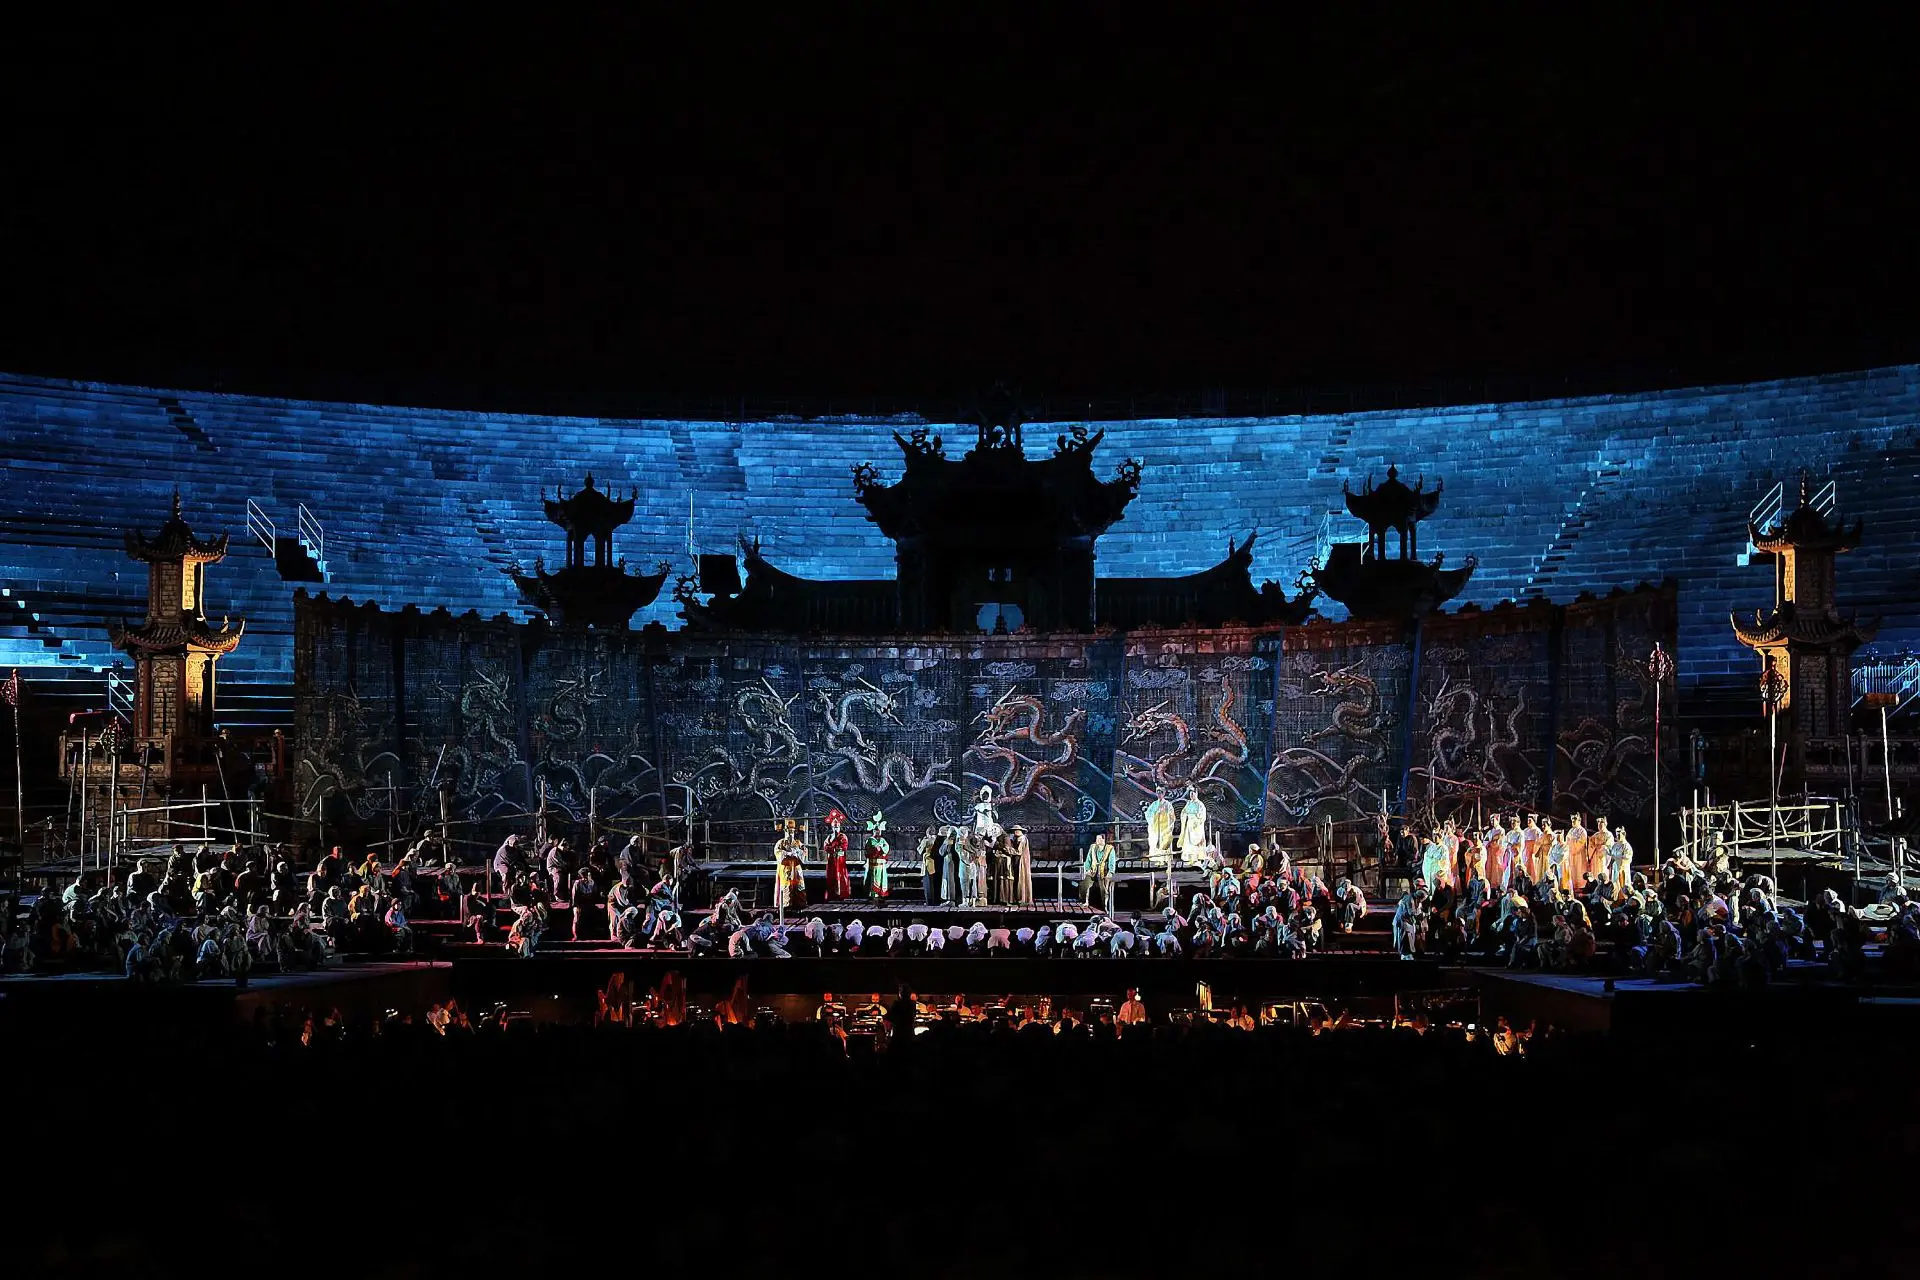 The stage is dominated by a structure made of wood where the people of Peking are gathered. Some are sitting, others crouching, and still others prostrate. On the central walkway stand the three ministers of state Ping, Pong e Pang, dressed in yellow, red and green, with a dominant color for each. Princess Turandot is there dressed in a silvery suit similar to armor. In the back, along the brick wall with the dragons, you can discern pagodas and towering buildings with overlapping roofs: a forbidden city hidden from view. In the background are the tiers of the arena.